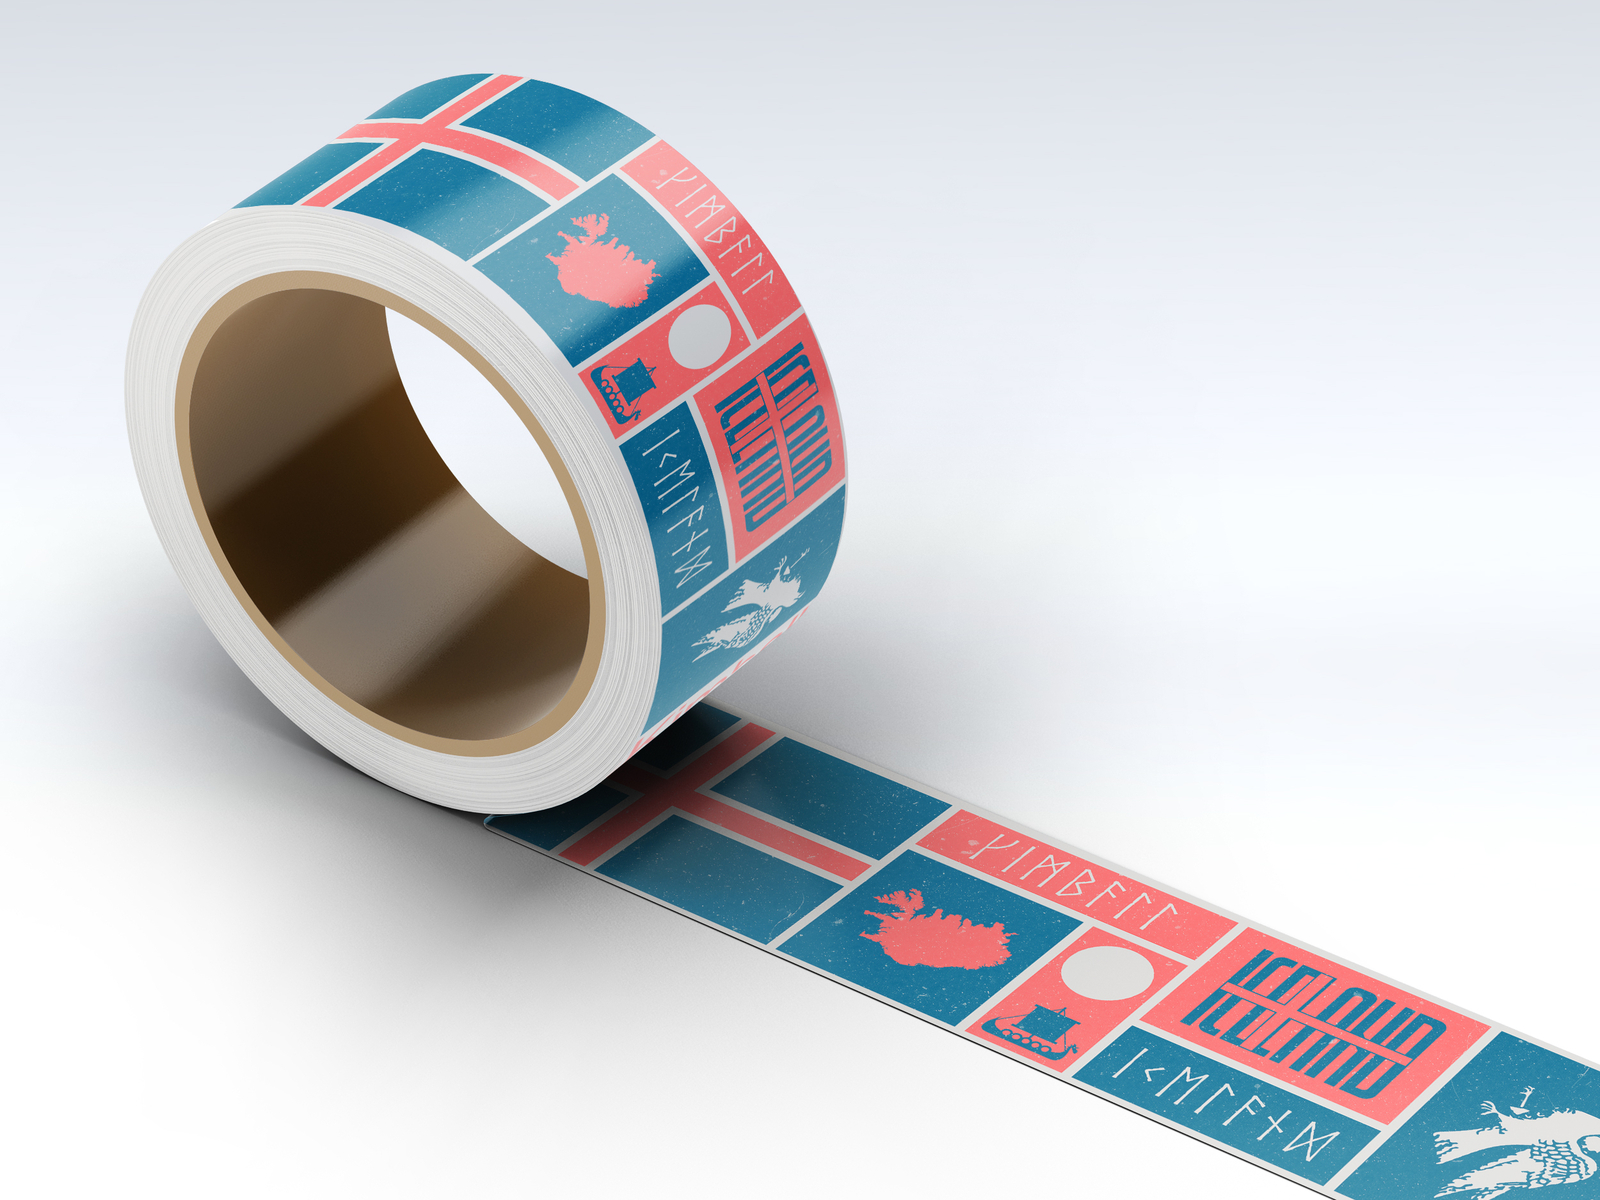 Download Iceland Packing Tape 051619 Mockup by Kenneth Spond on ...